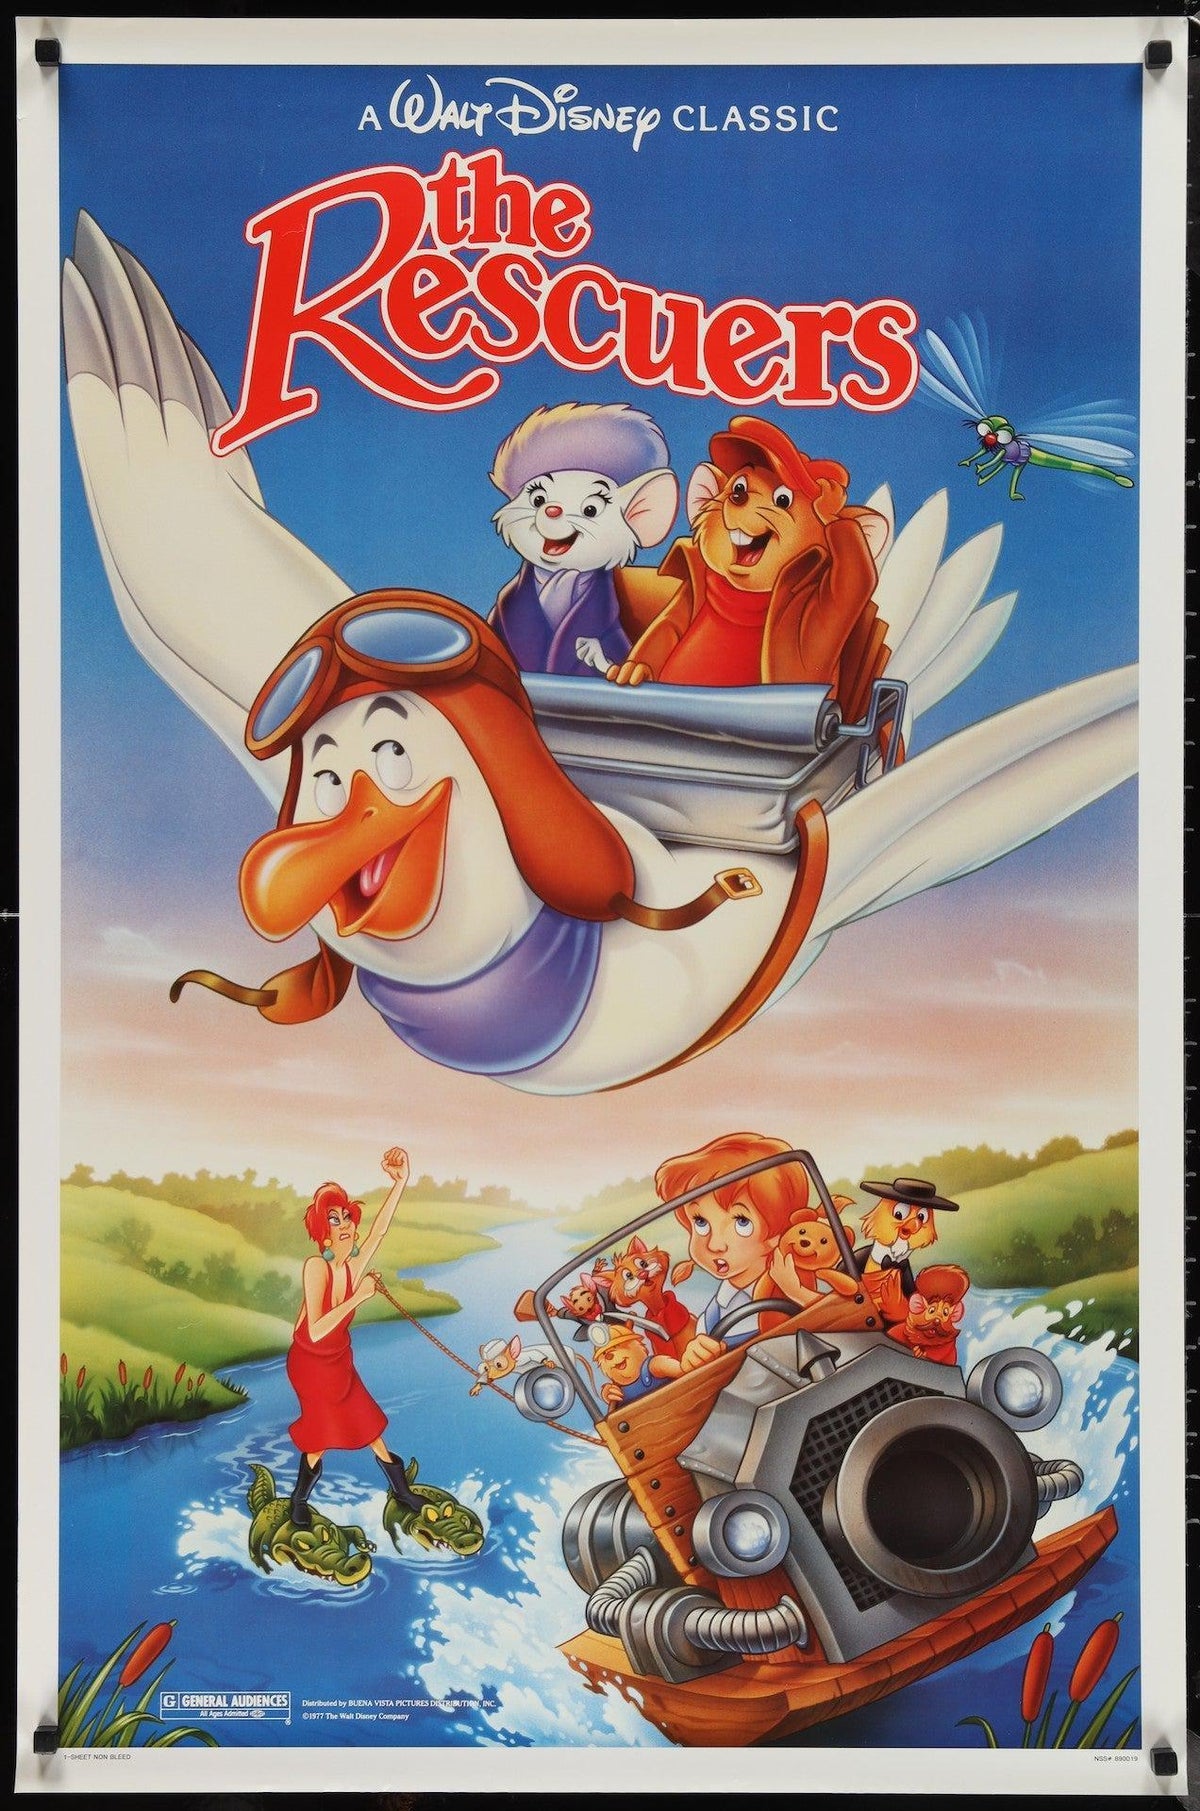 The Rescuers 1 Sheet (27x41) Original Vintage Movie Poster